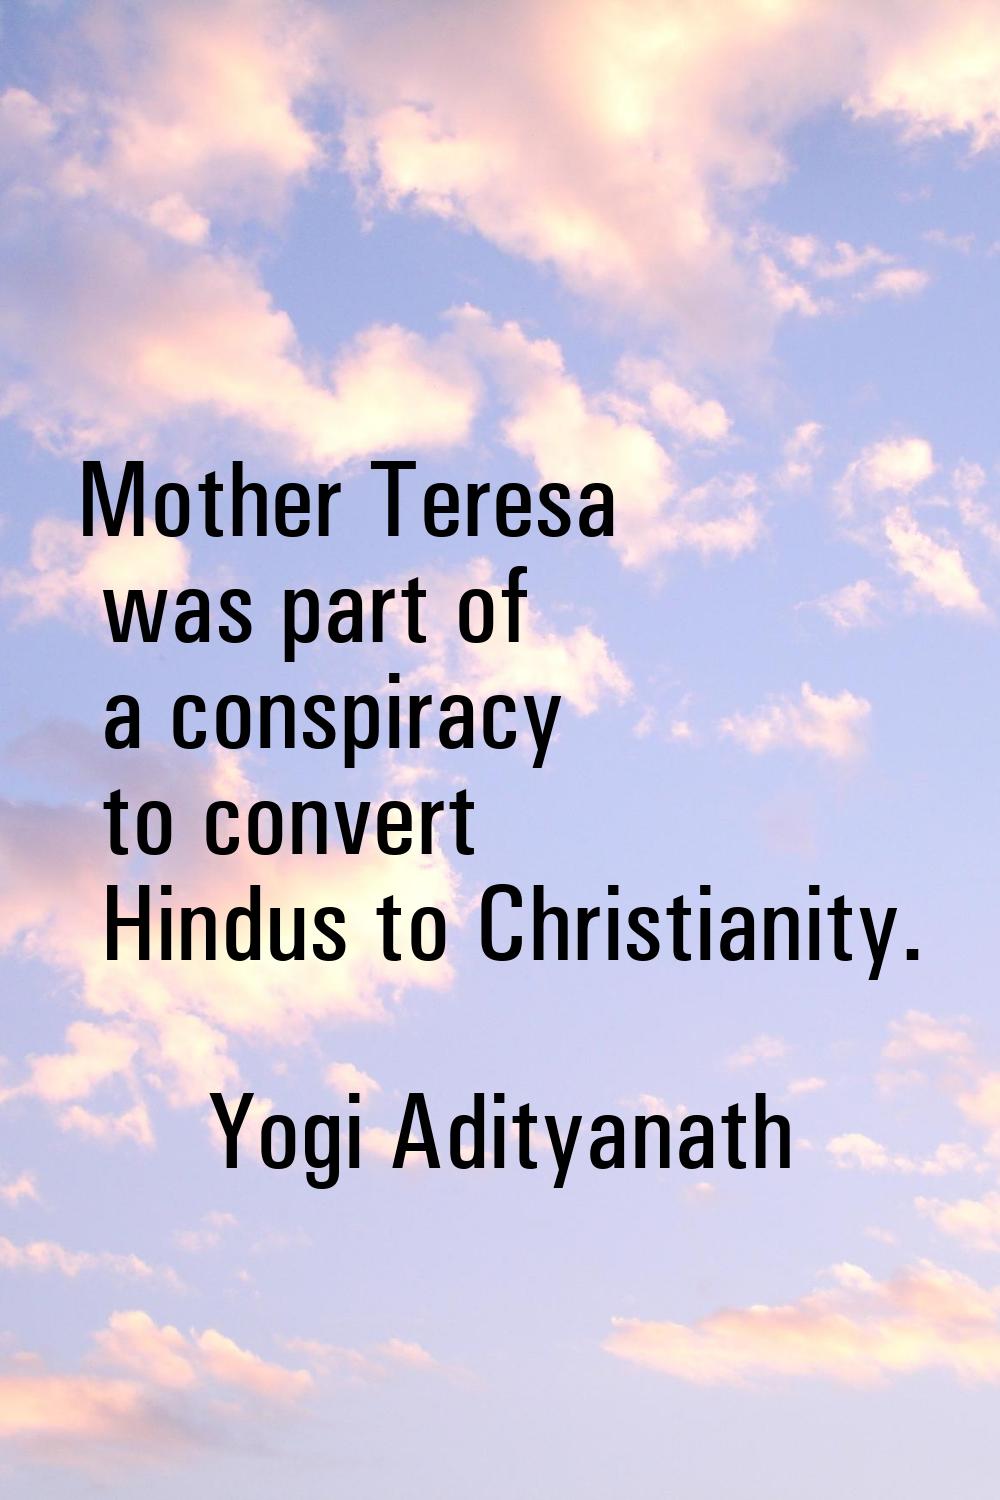 Mother Teresa was part of a conspiracy to convert Hindus to Christianity.